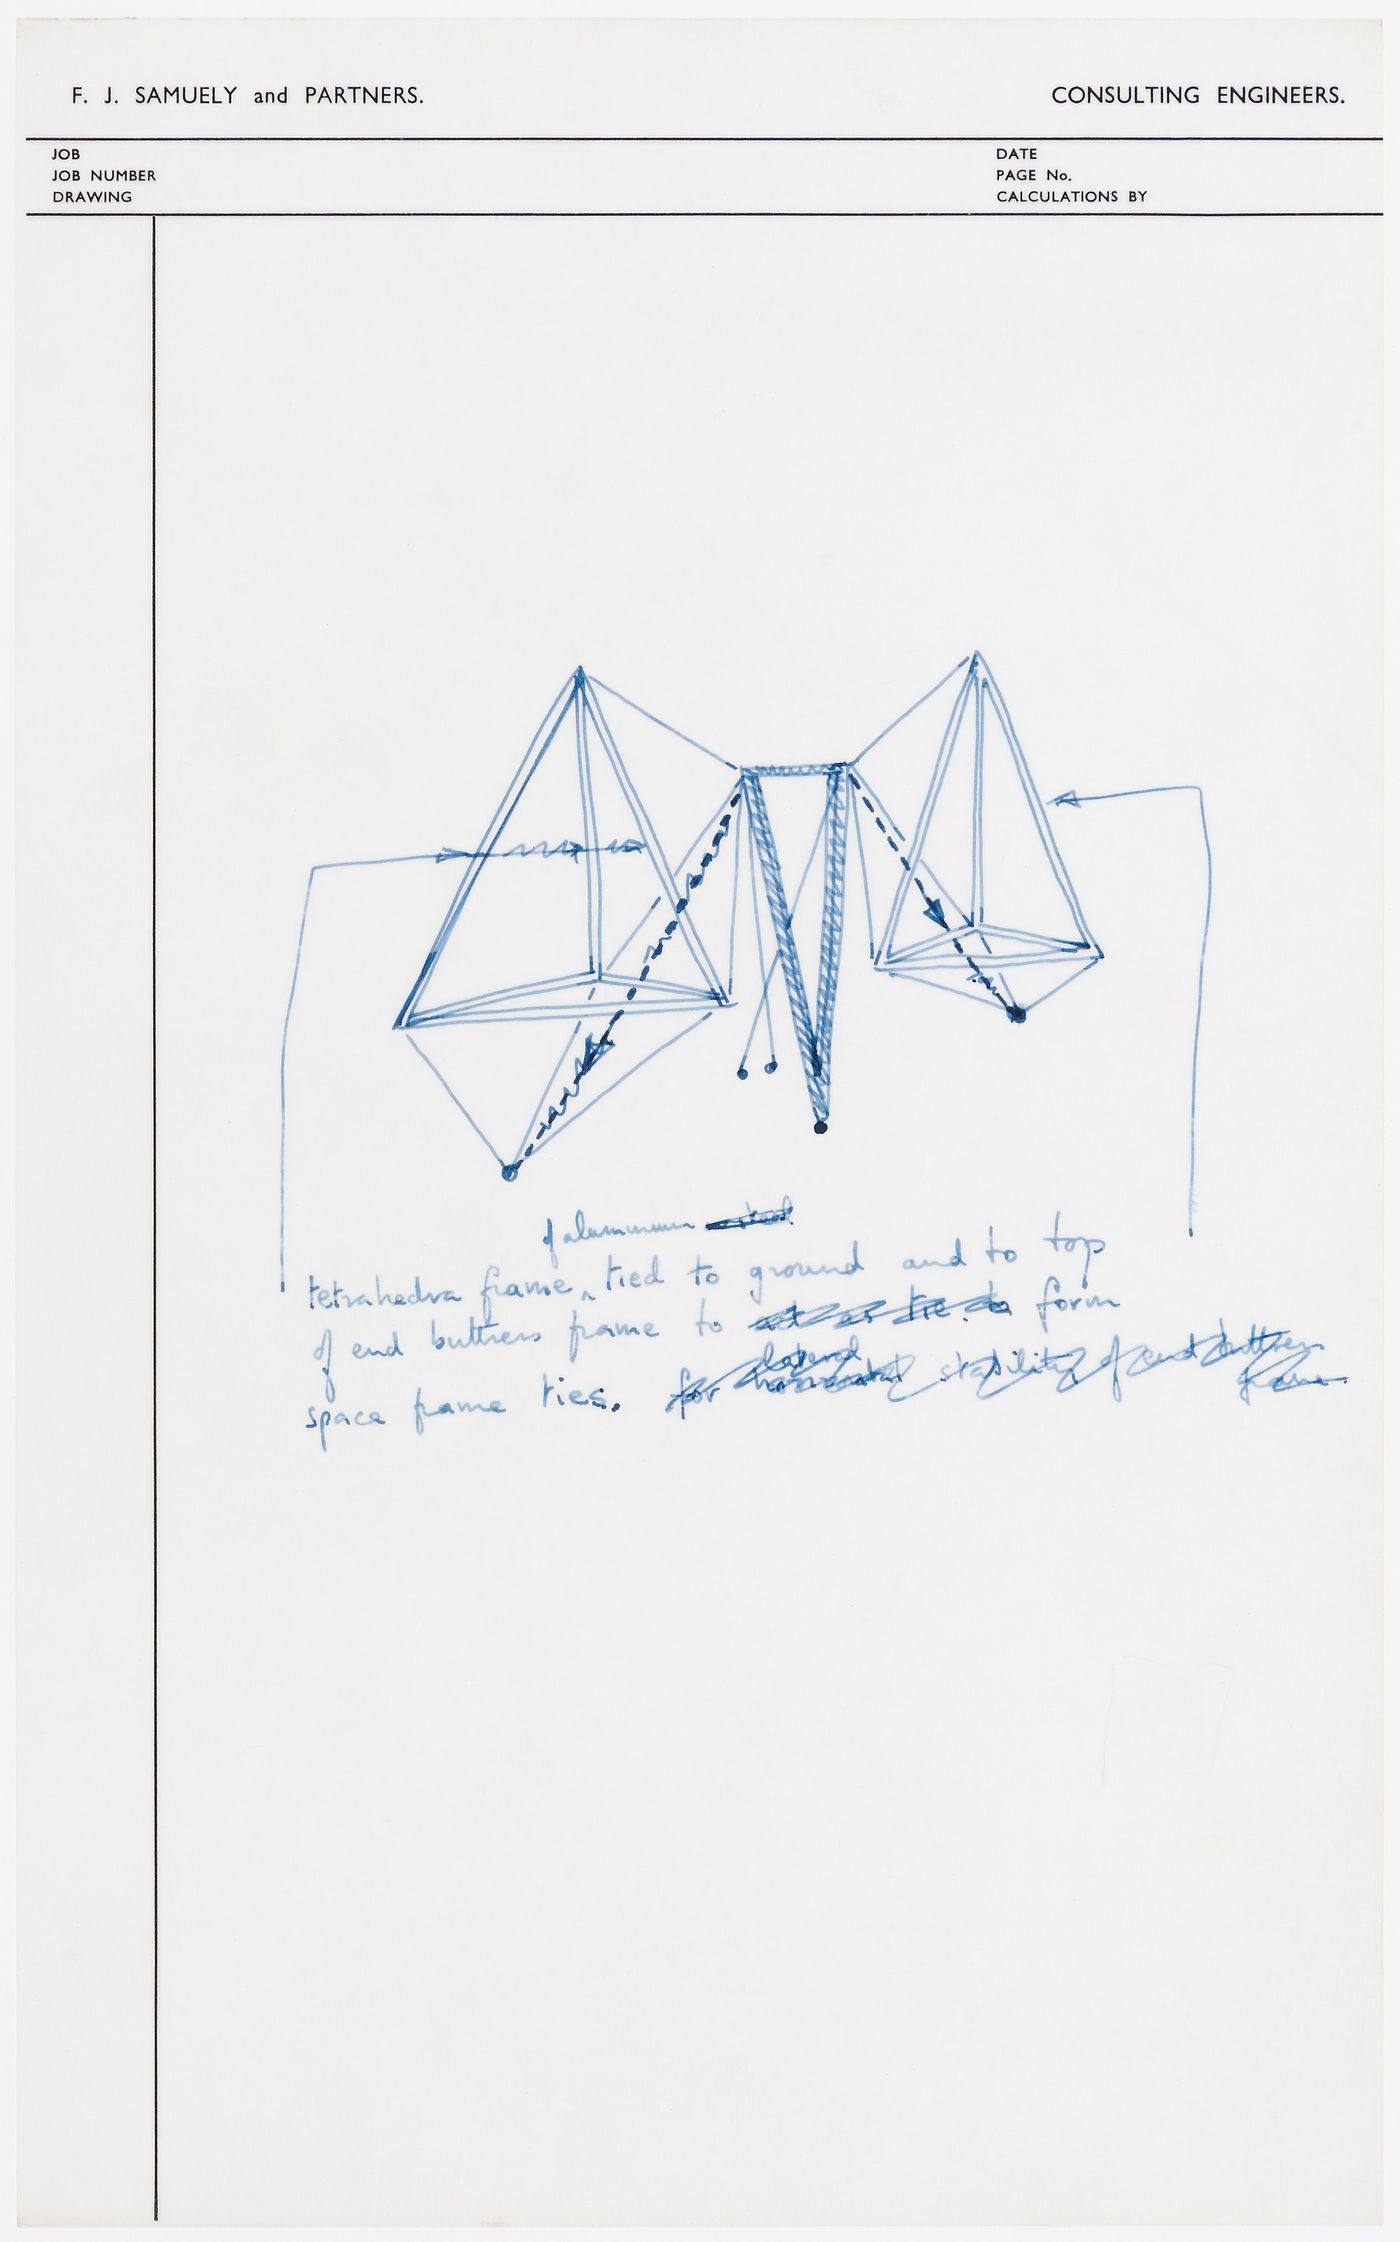 Technical sketch showing aluminum tetrahedra frame tied to ground and to top of end buttress to form space frame ties for the Aviary at the London Zoo, London, England